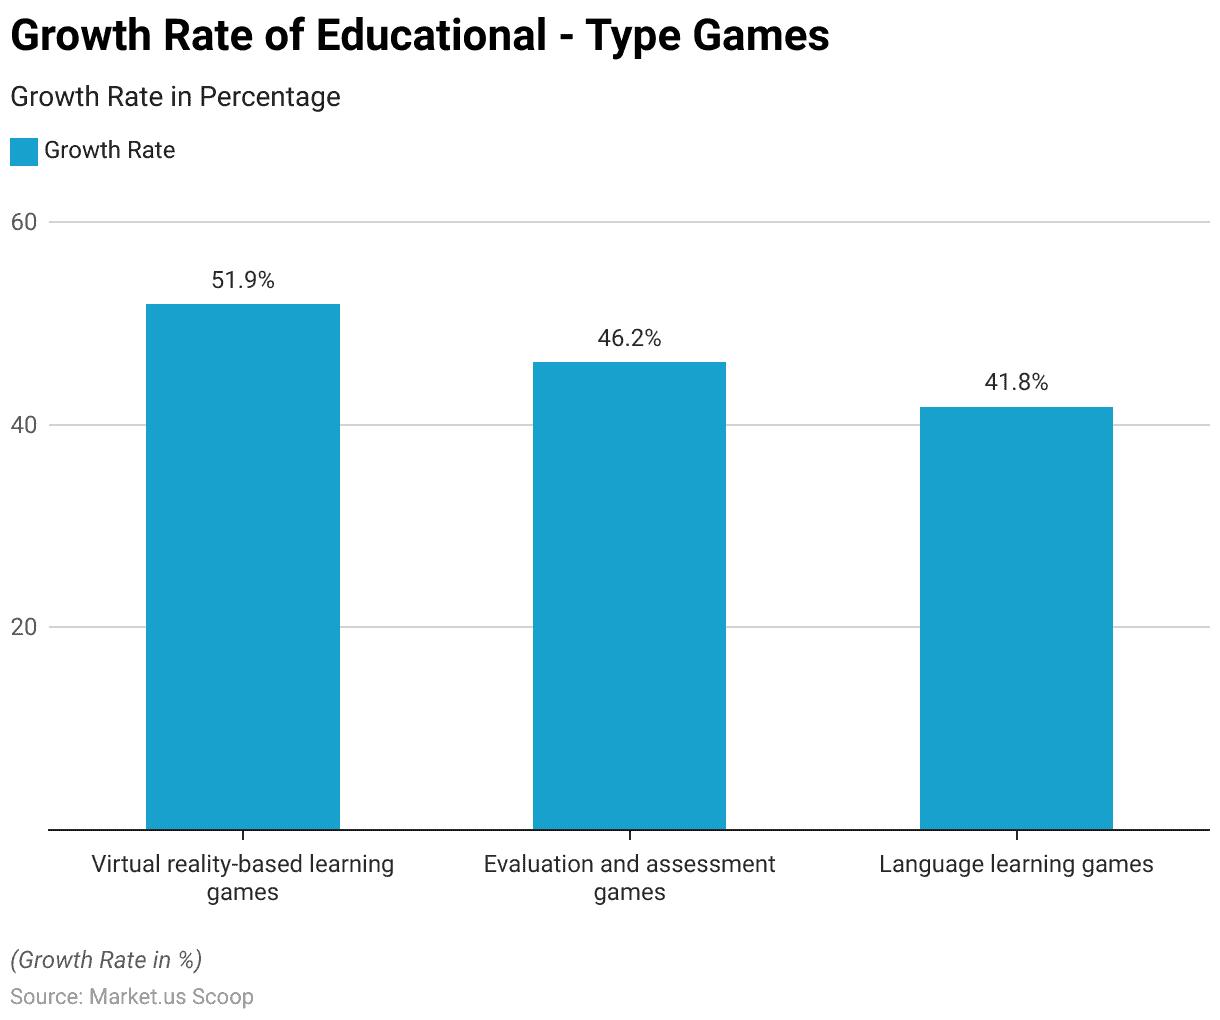 Growth rate of educational - type games